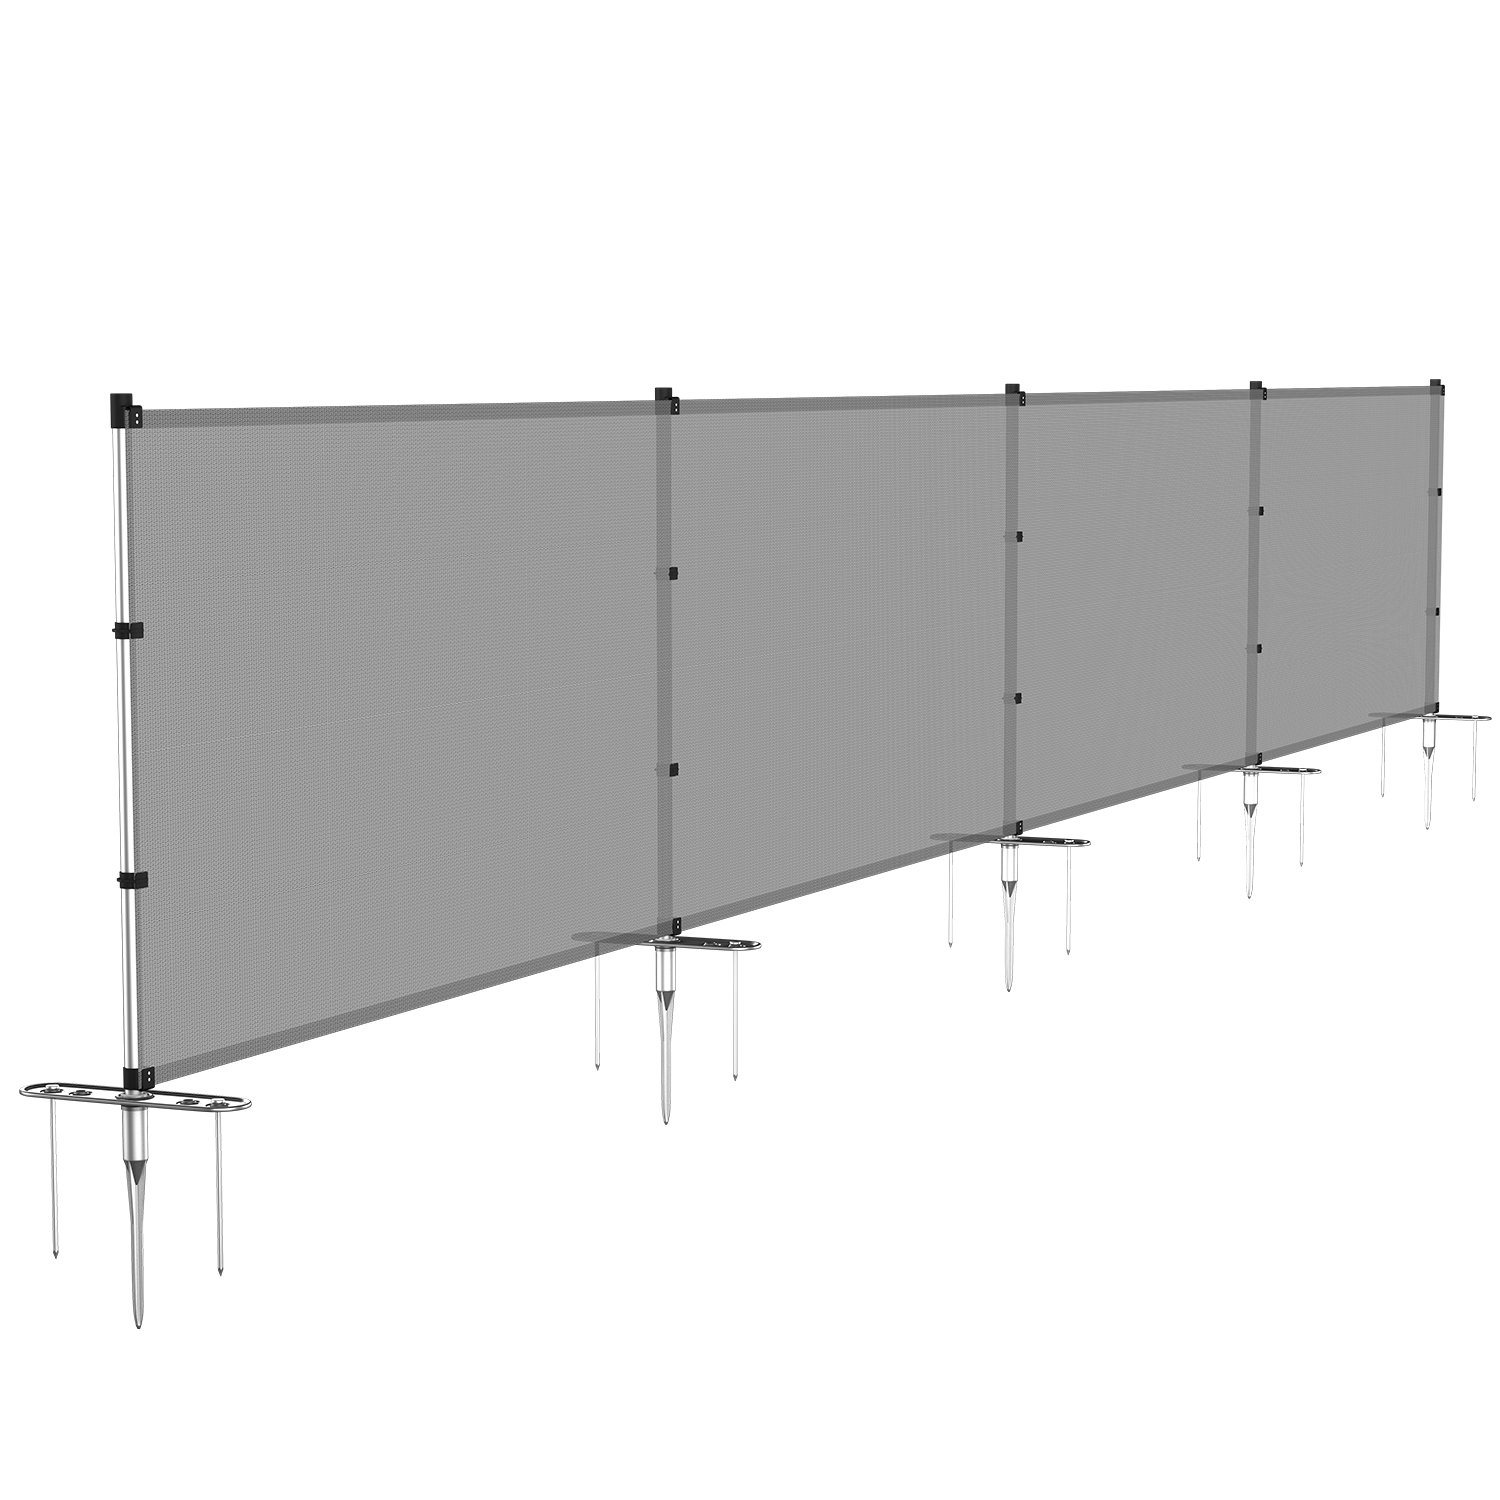 Nashville-Davidson Mall Gray 4ft Outdoor Mesh Baltimore Mall Fence with Poles Freestanding Movable Pati